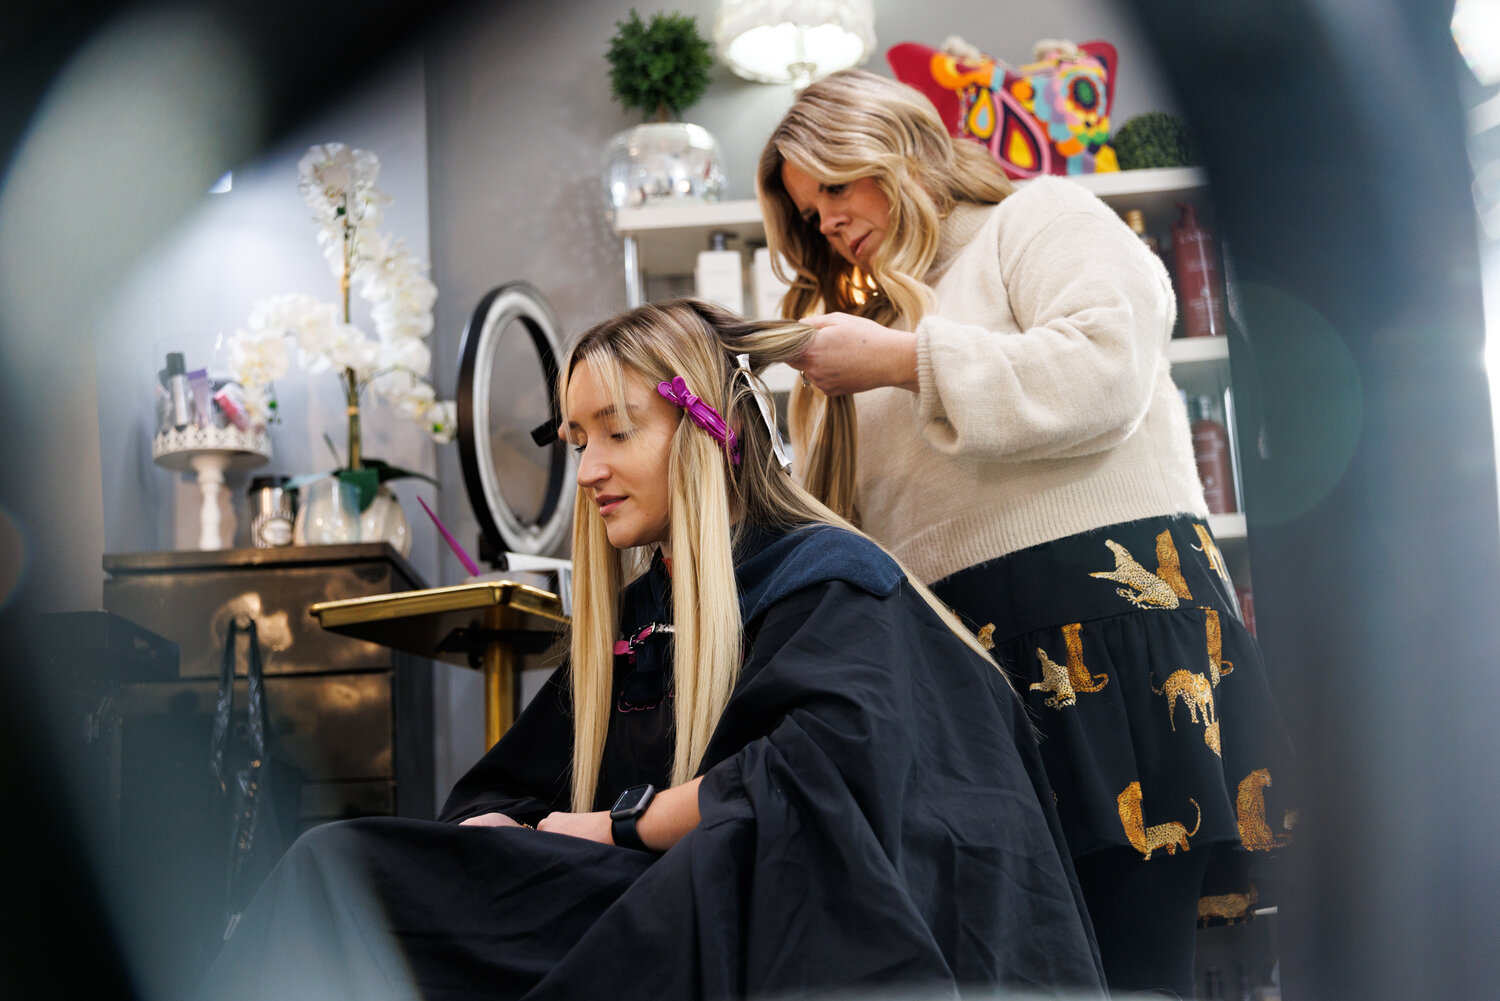 Madison Miller, a pre-med college student at Fayetteville Technical Community College, visits Bombshells Salon quarterly. She enjoys relaxing and talking with the owner, Suzanne Williams, as she styles her hair.